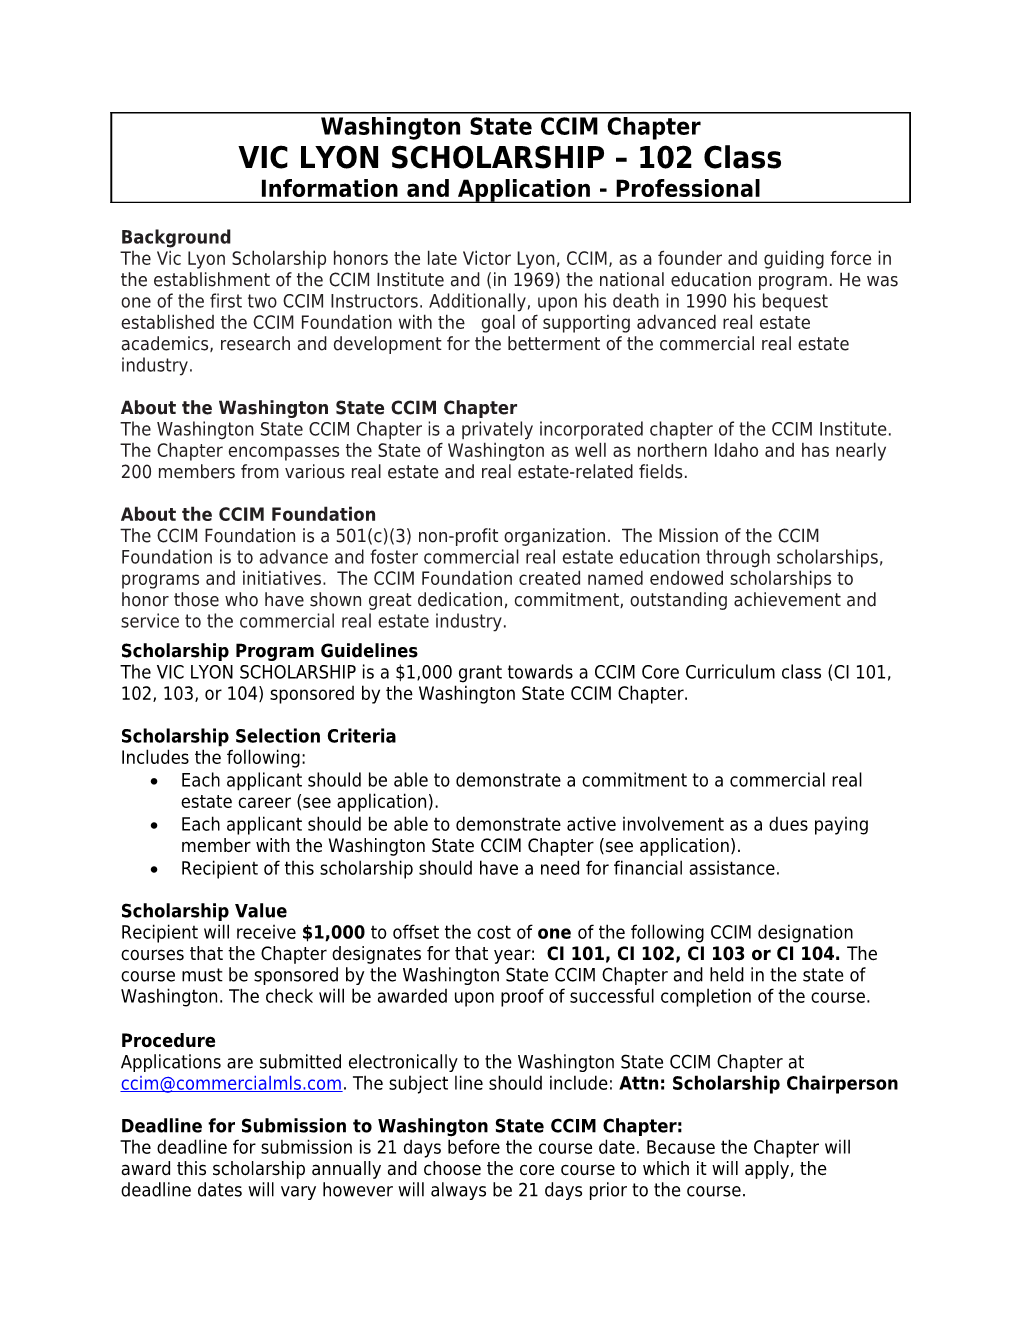 Washington State CCIM Chapter VIC LYON SCHOLARSHIP 102 Class Information and Application